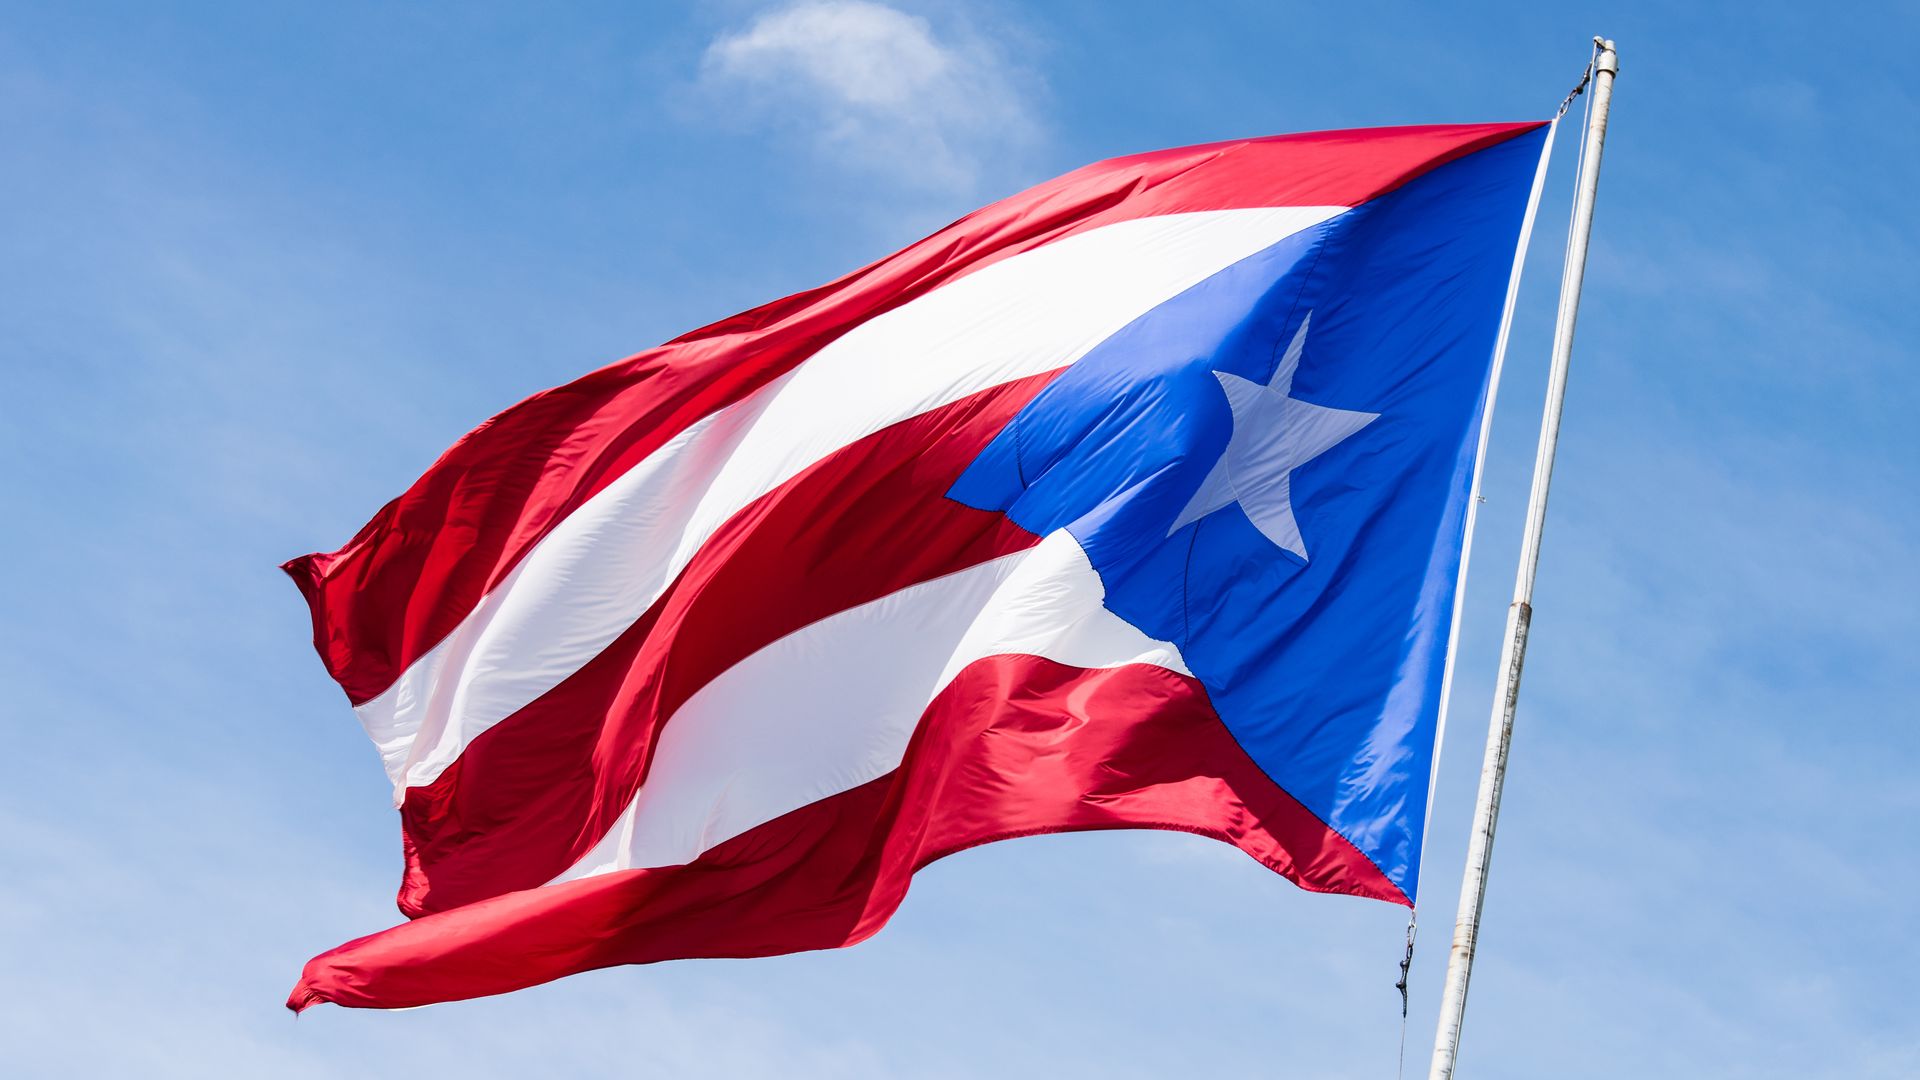 The flag of Puerto Rico, a U.S. territory.